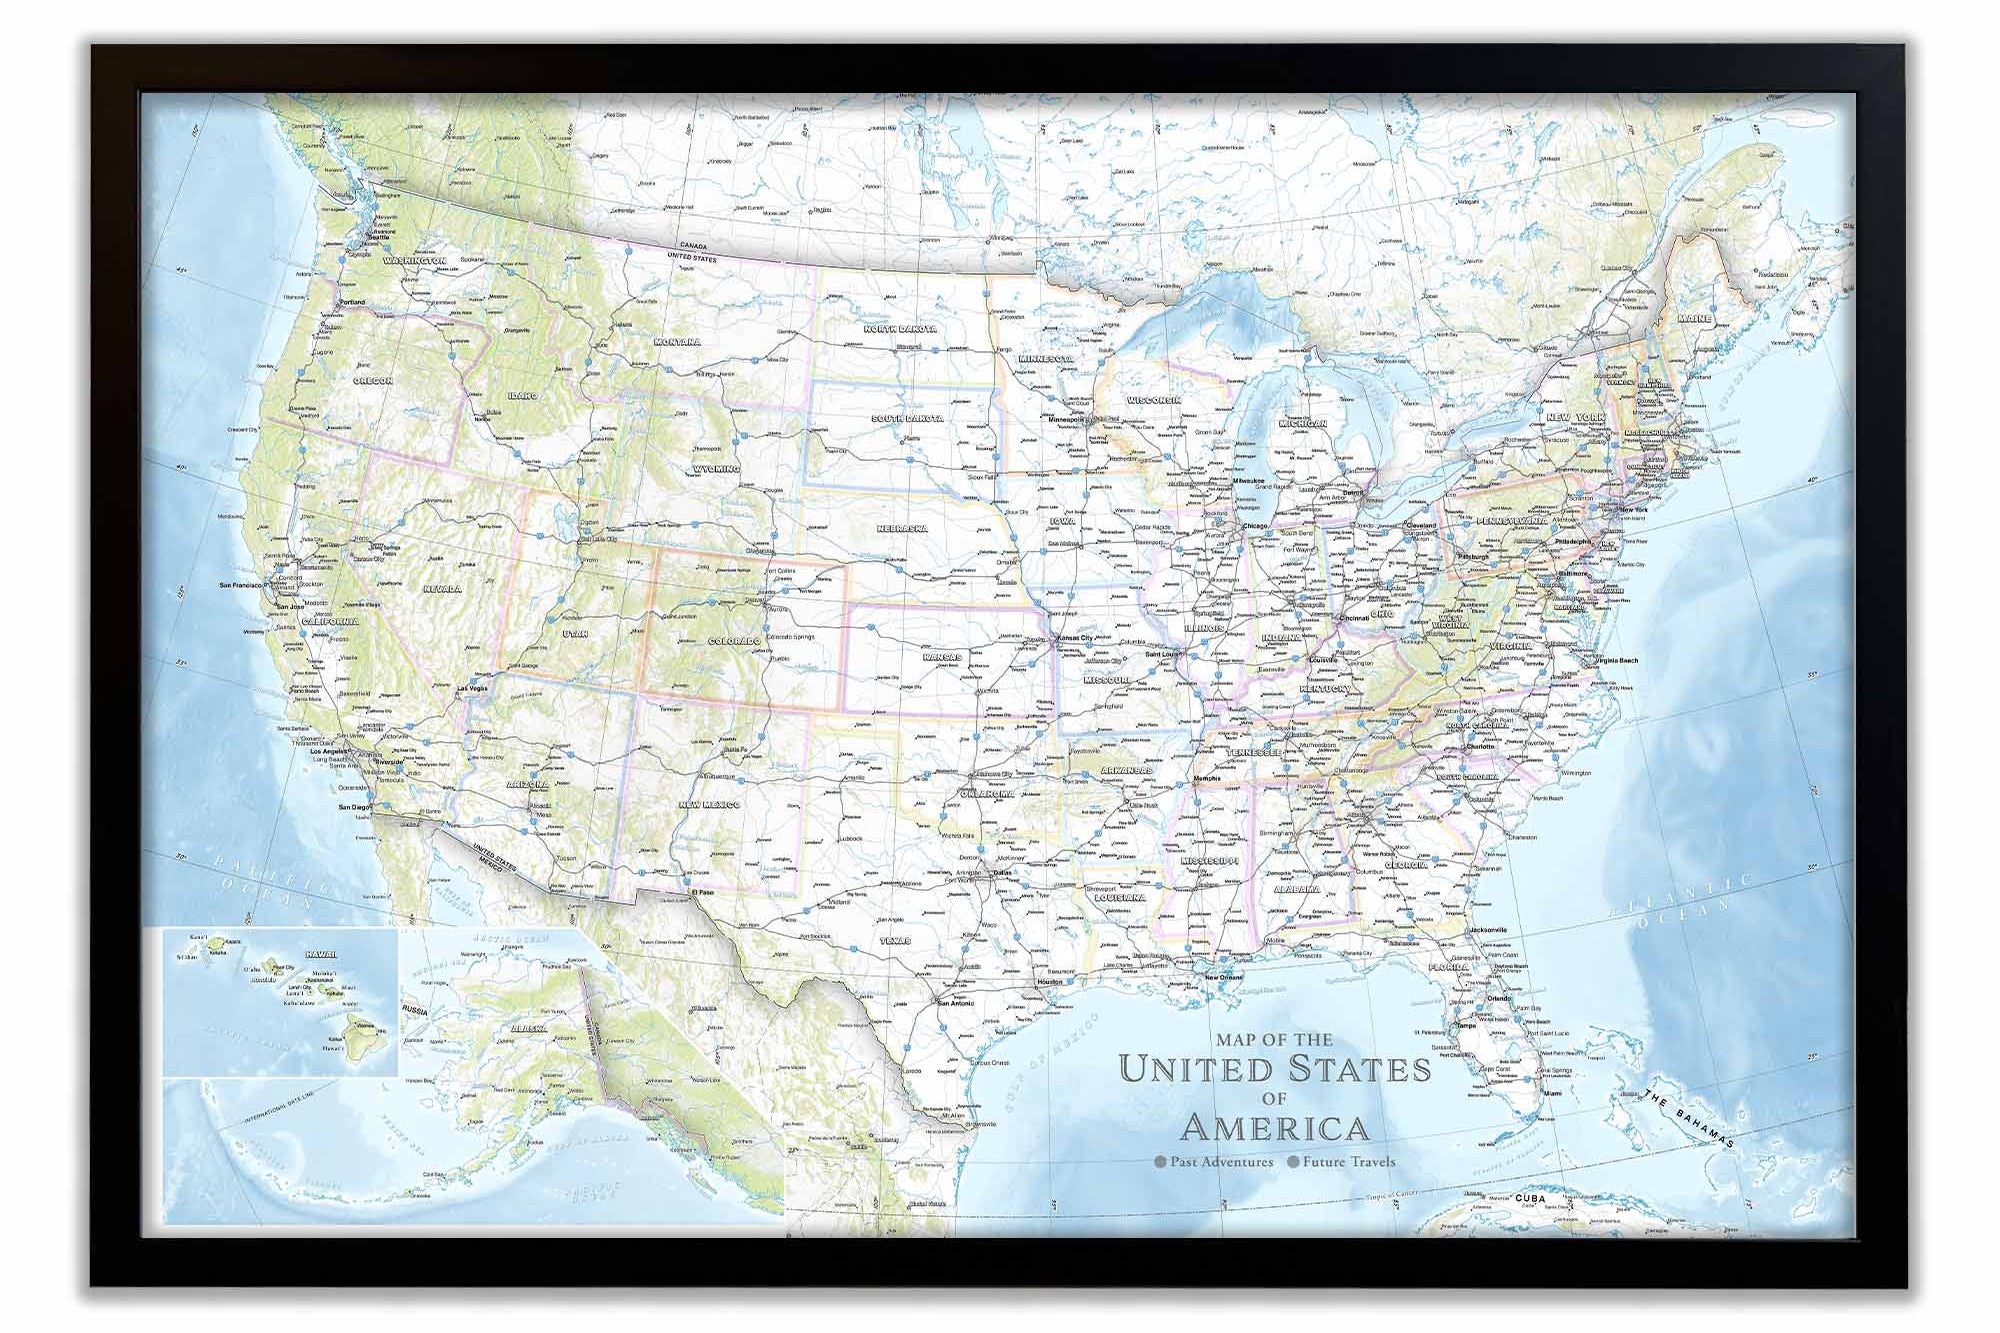 US Travel Map with Pins, labeled with states and detailed cities - track your usa travels!